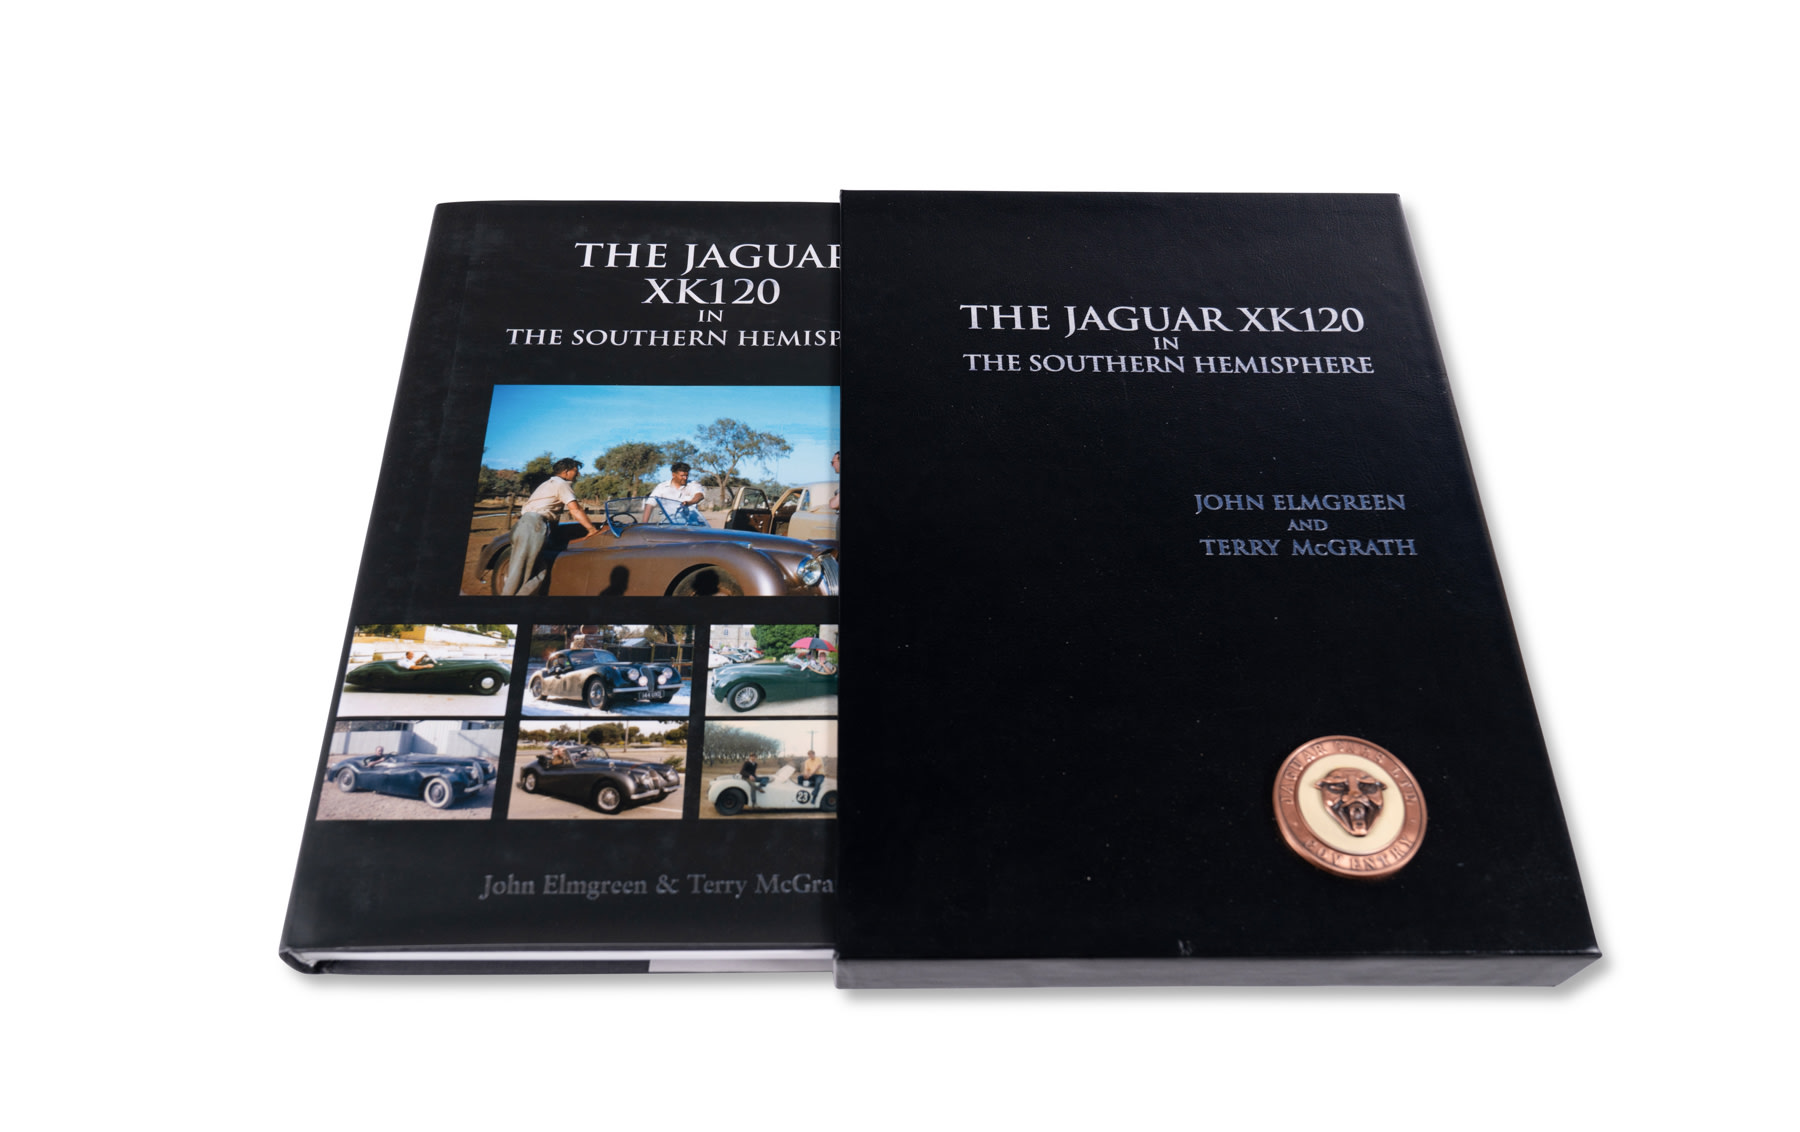 The Jaguar XK120 in the Southern Hemisphere by John Elmgreen and Terry McGrath, No. 524 of 1,000